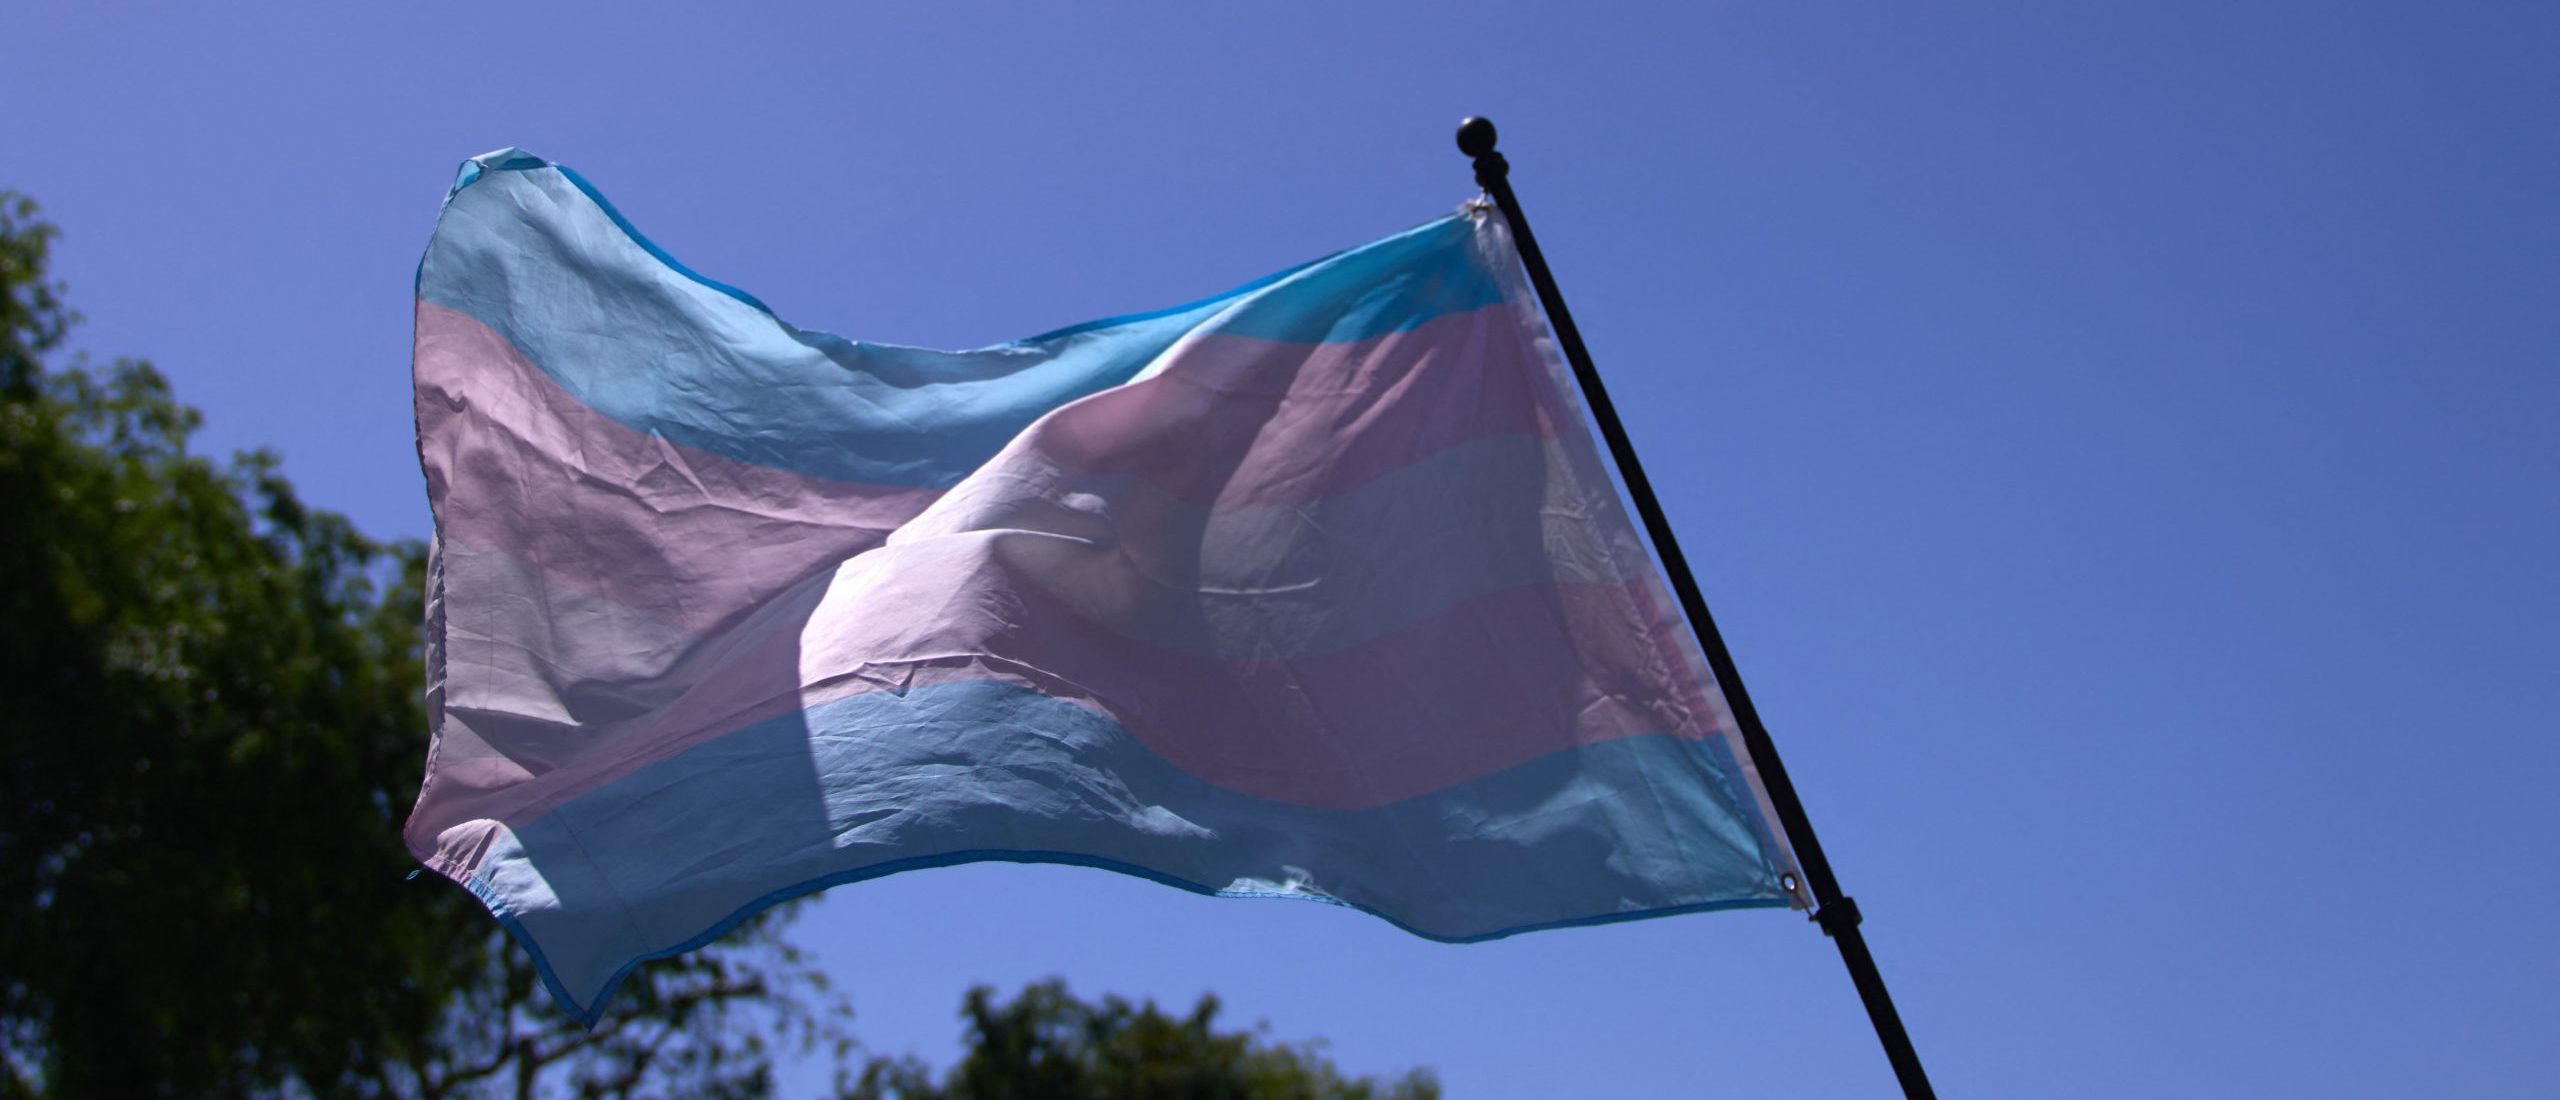 A Transgender Pride Flag is held above the crowd of LGBTQ+ activists (Photo by ALLISON DINNER/Getty Images)